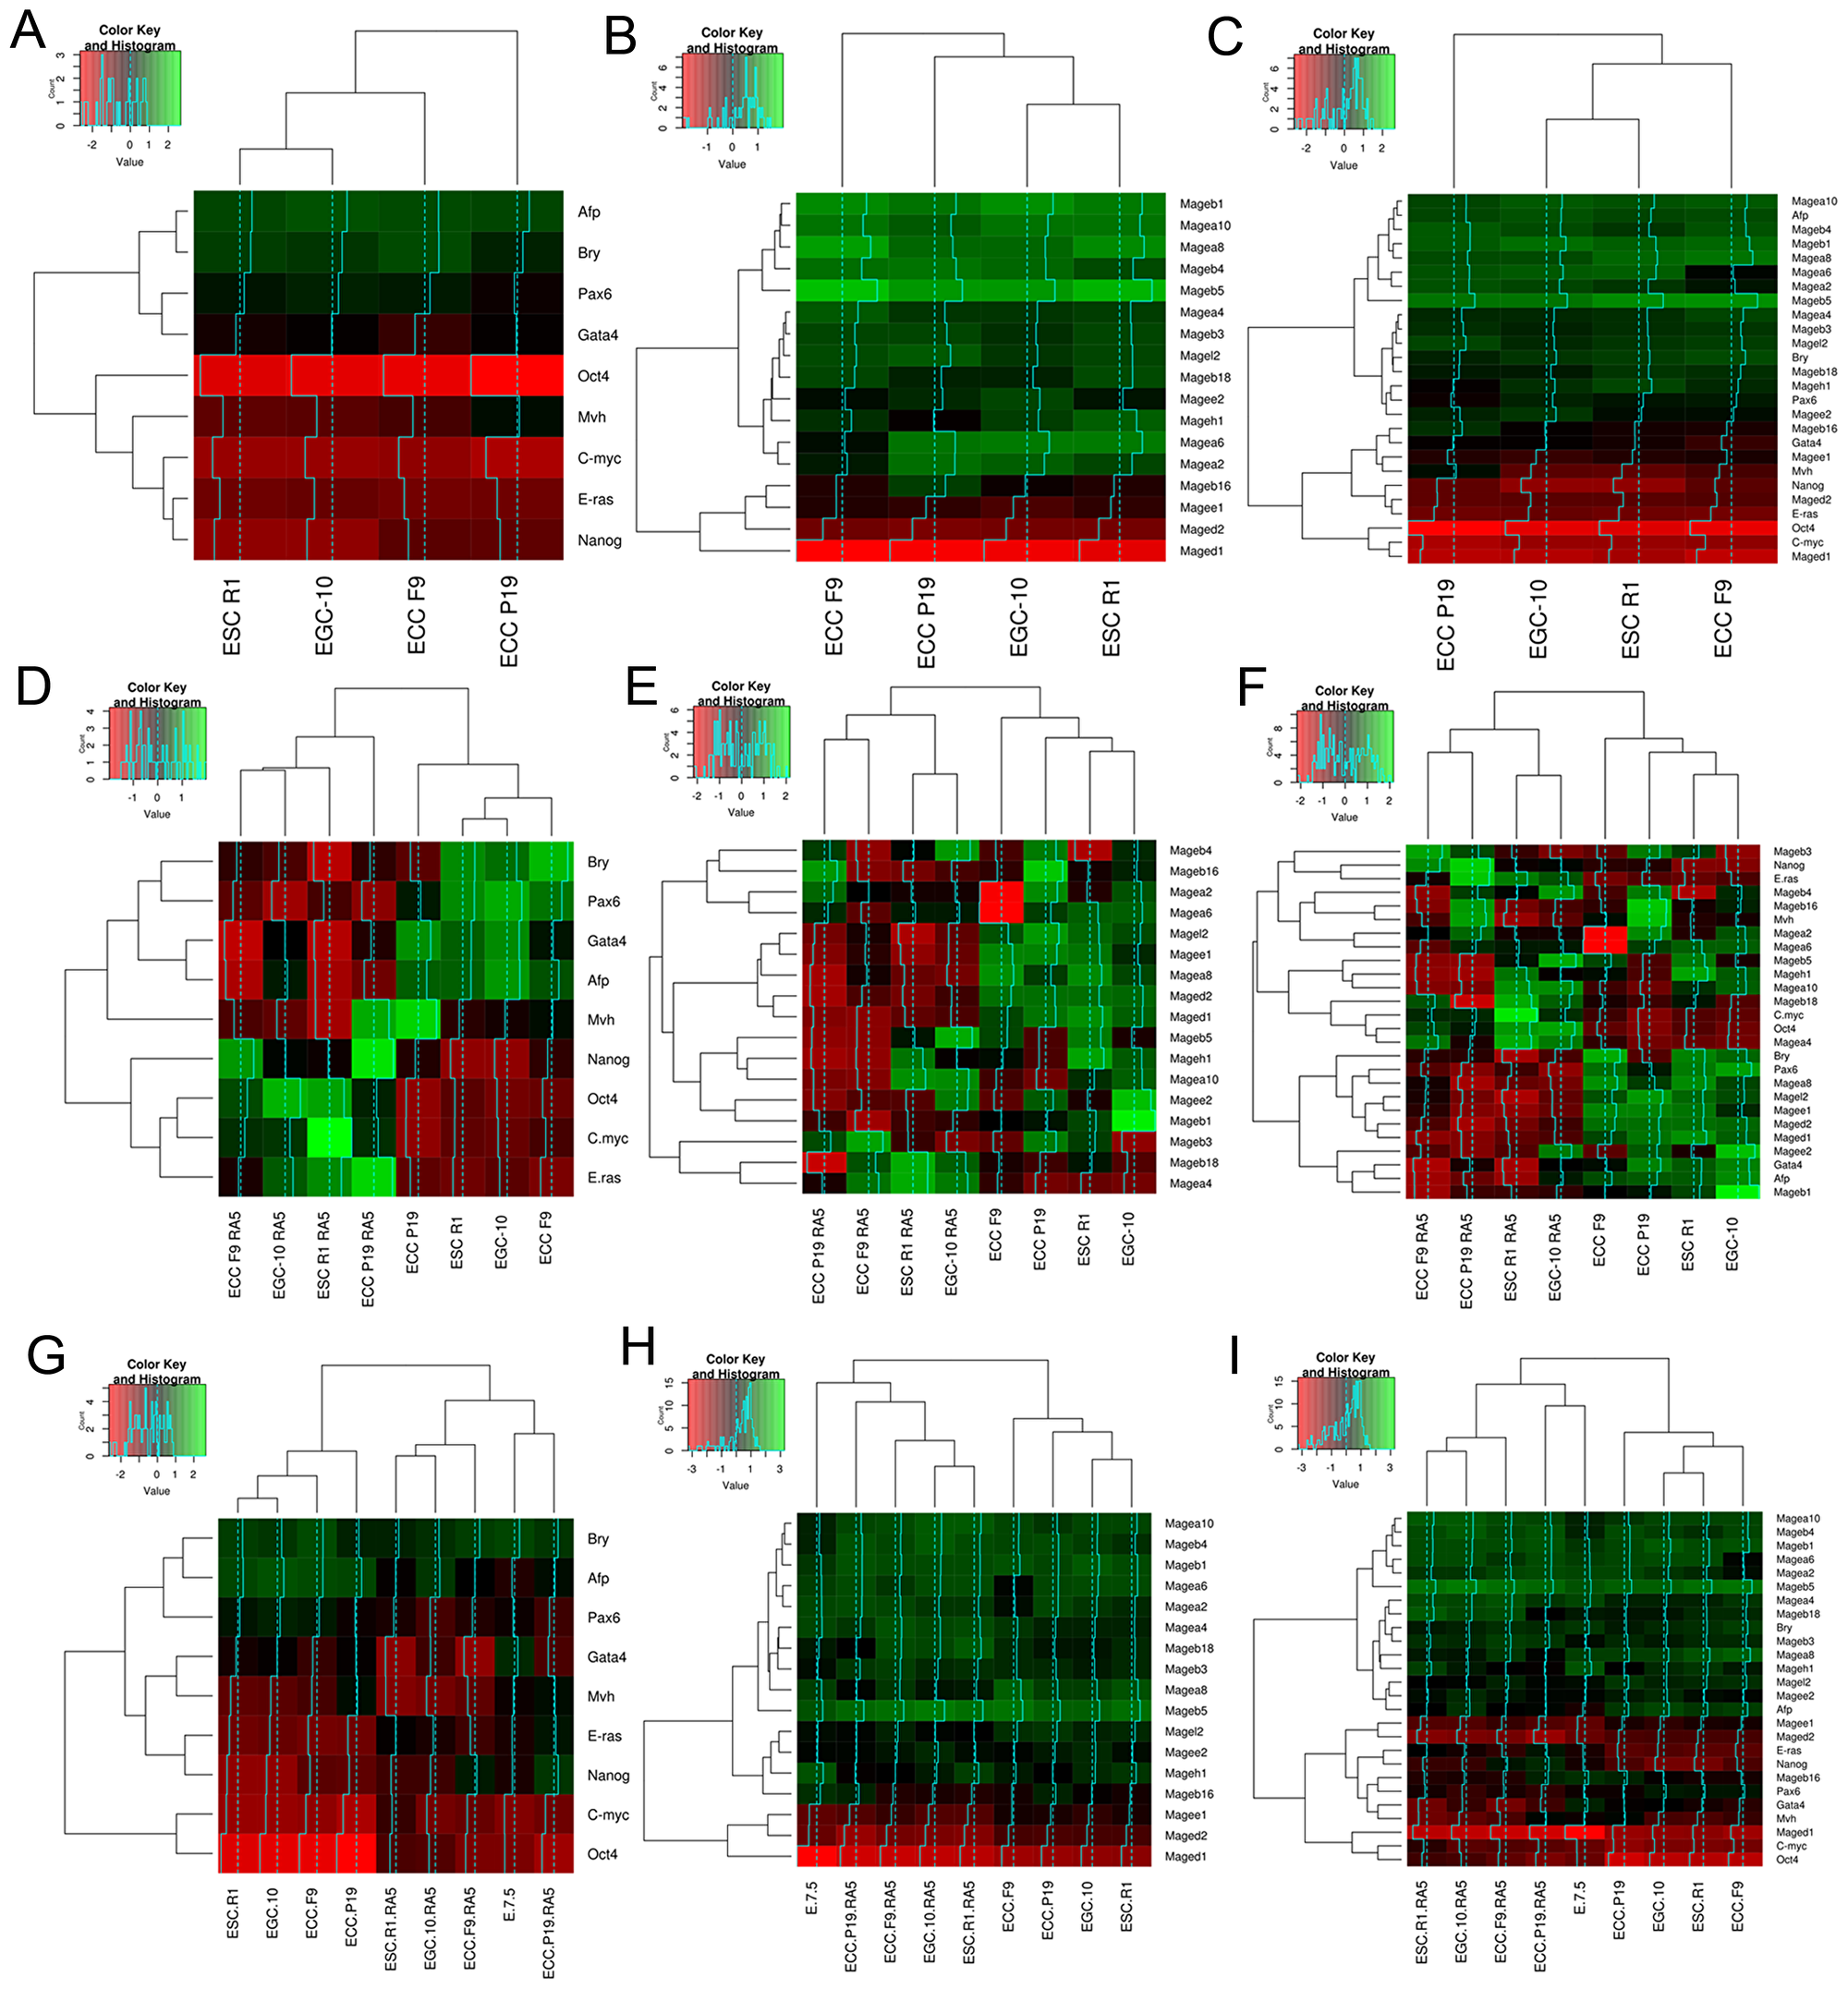 Heatmaps and hierarchical clustering dendrograms for gene expression patterns of ESC, EGC, ECC and E7.5 embryo.